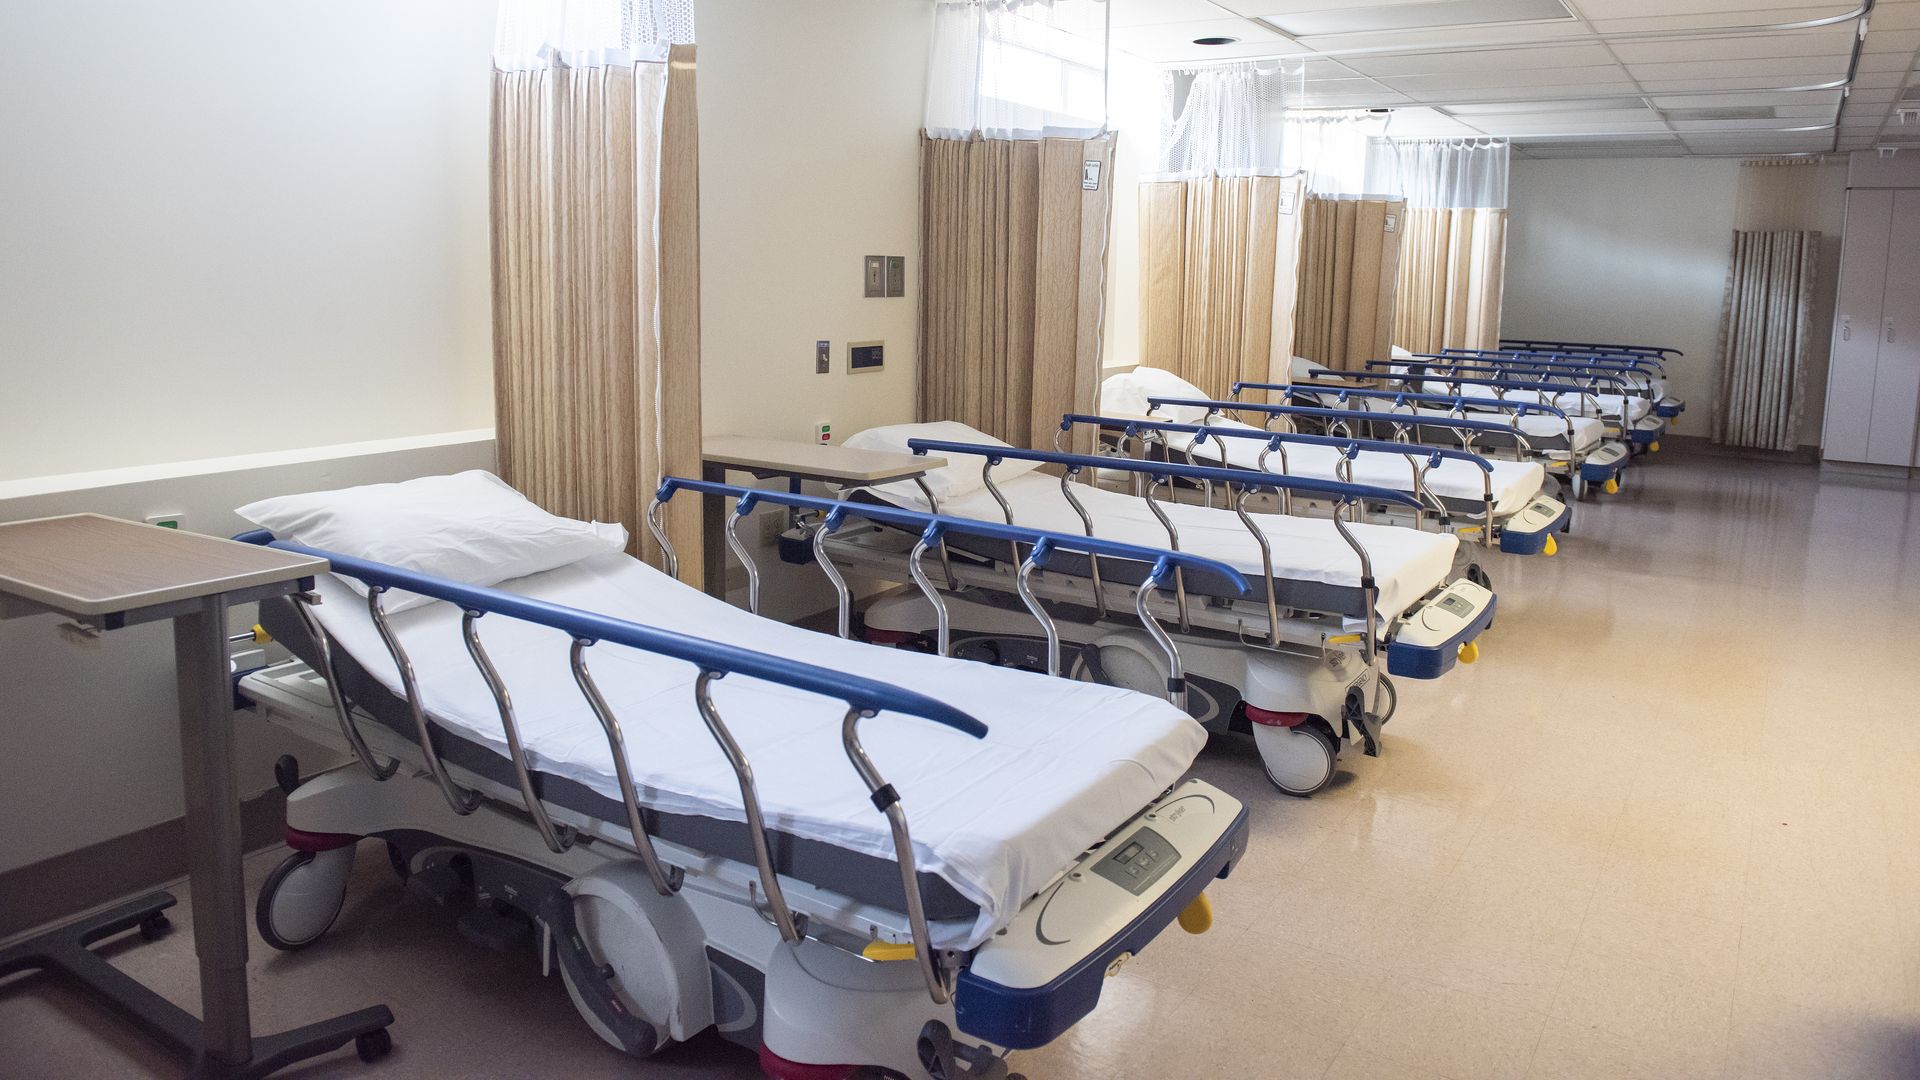 Empty beds in a hospital emergency room.